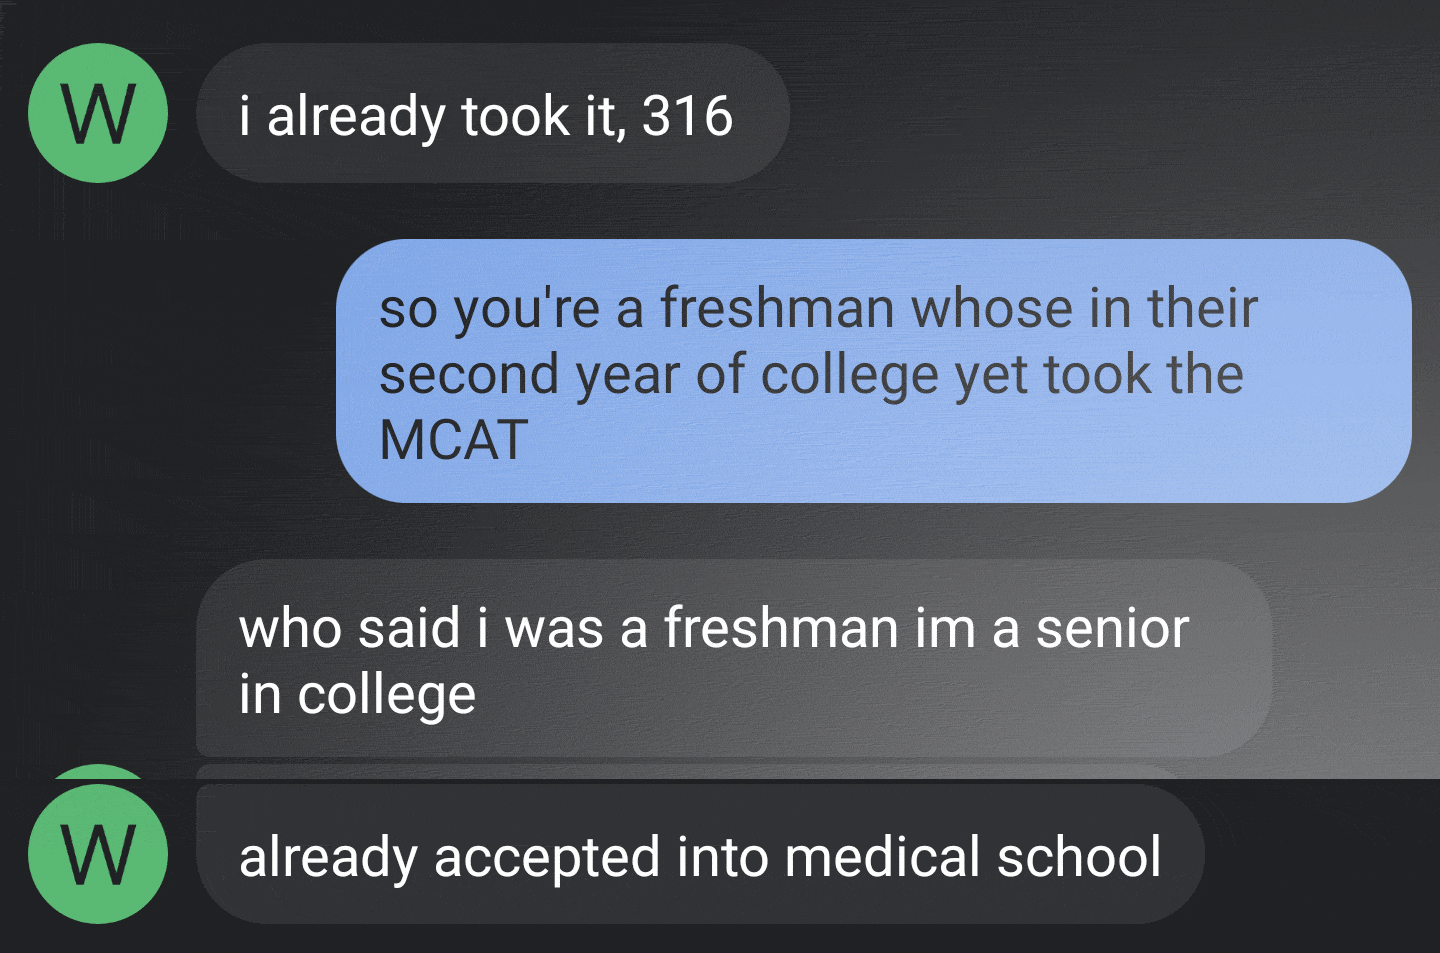 multimedia - W i already took it, 316 so you're a freshman whose in their second year of college yet took the Mcat who said i was a freshman im a senior in college W already accepted into medical school